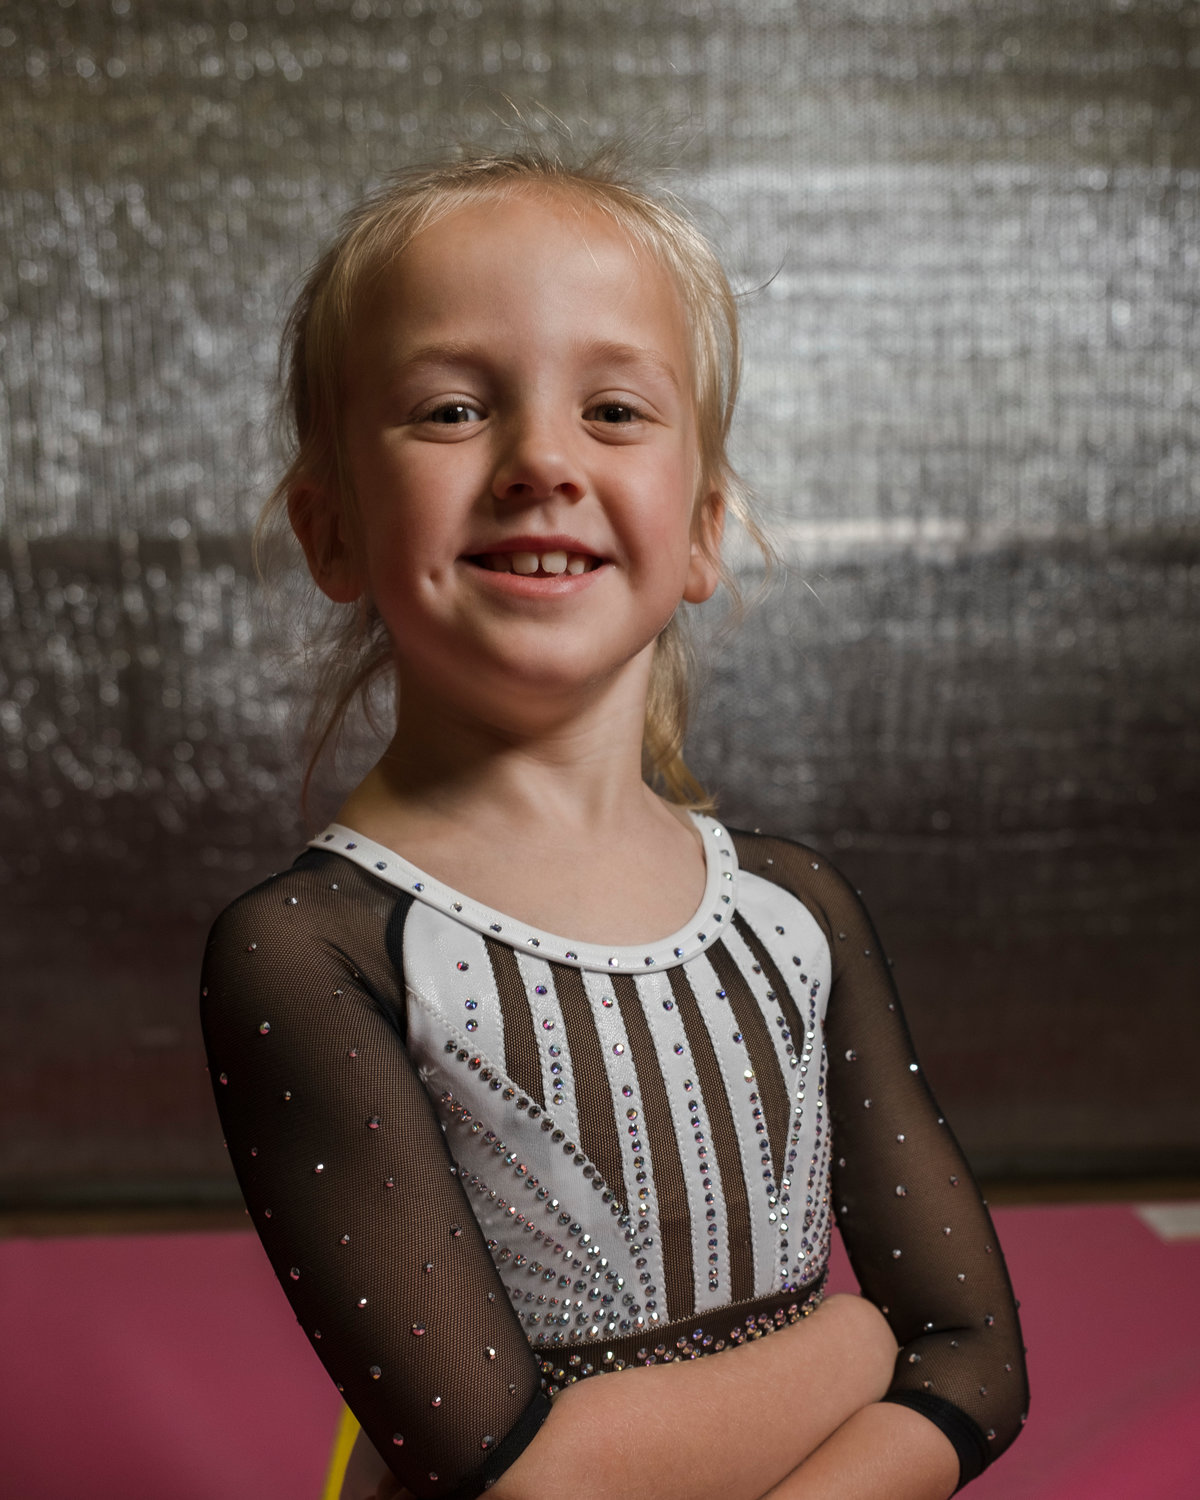 Xcel Bronze highlight: Maggie Myrick, 6, is in first grade at Daphne East Elementary School. This is her first year competing on the Eastern Shore Gymnastics Team and her favorite event is the vault because she "can do back handsprings on the big mat."